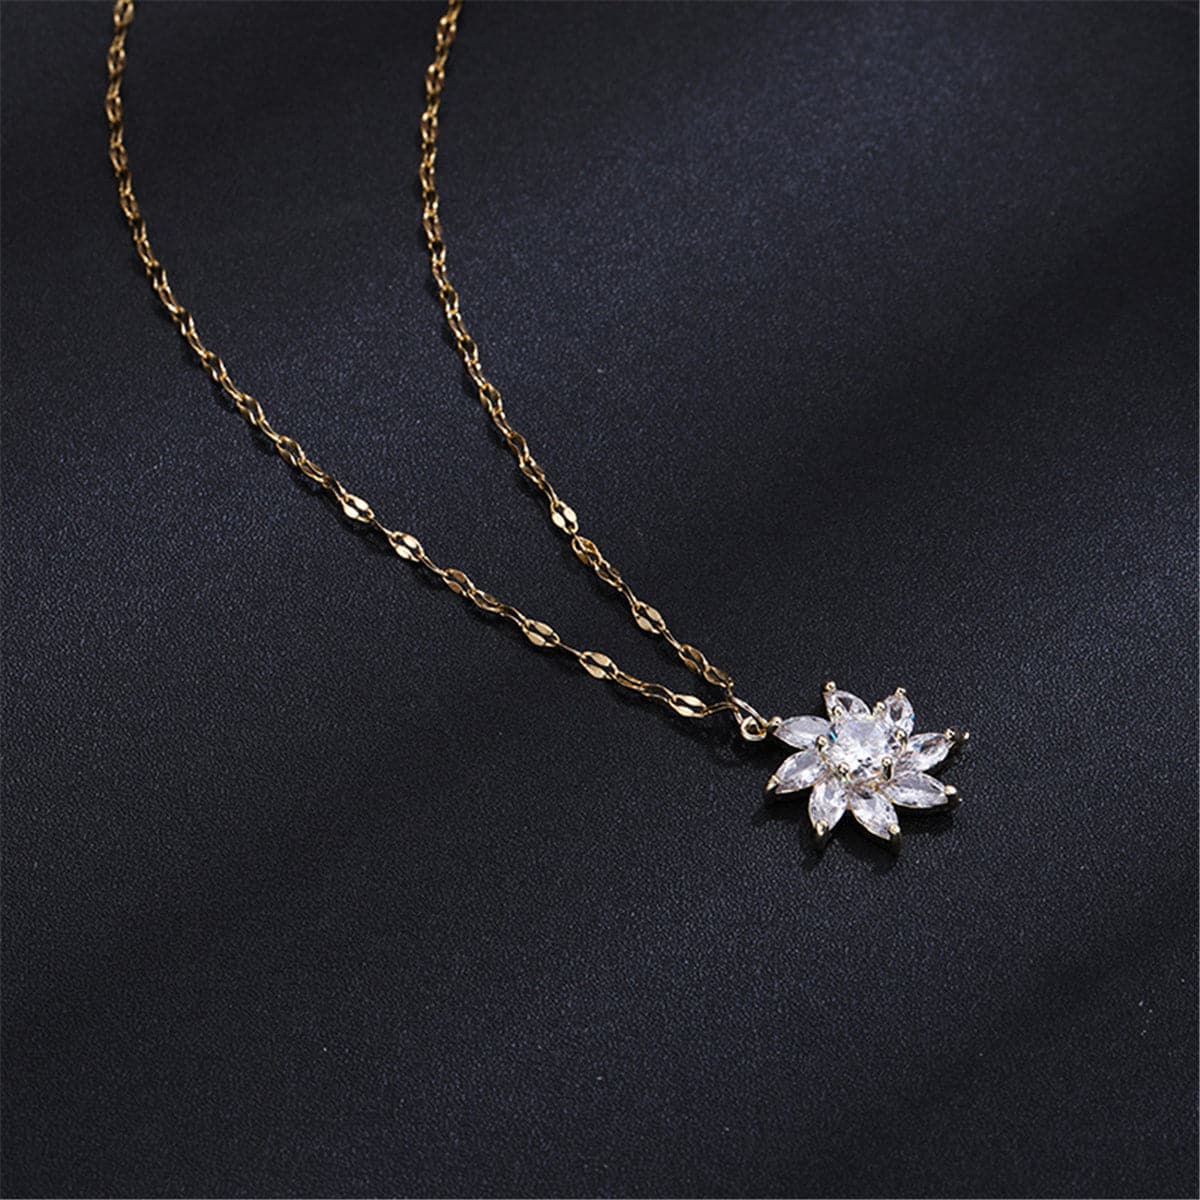 Crystal & 18K Gold-Plated Flower Pendant Necklace